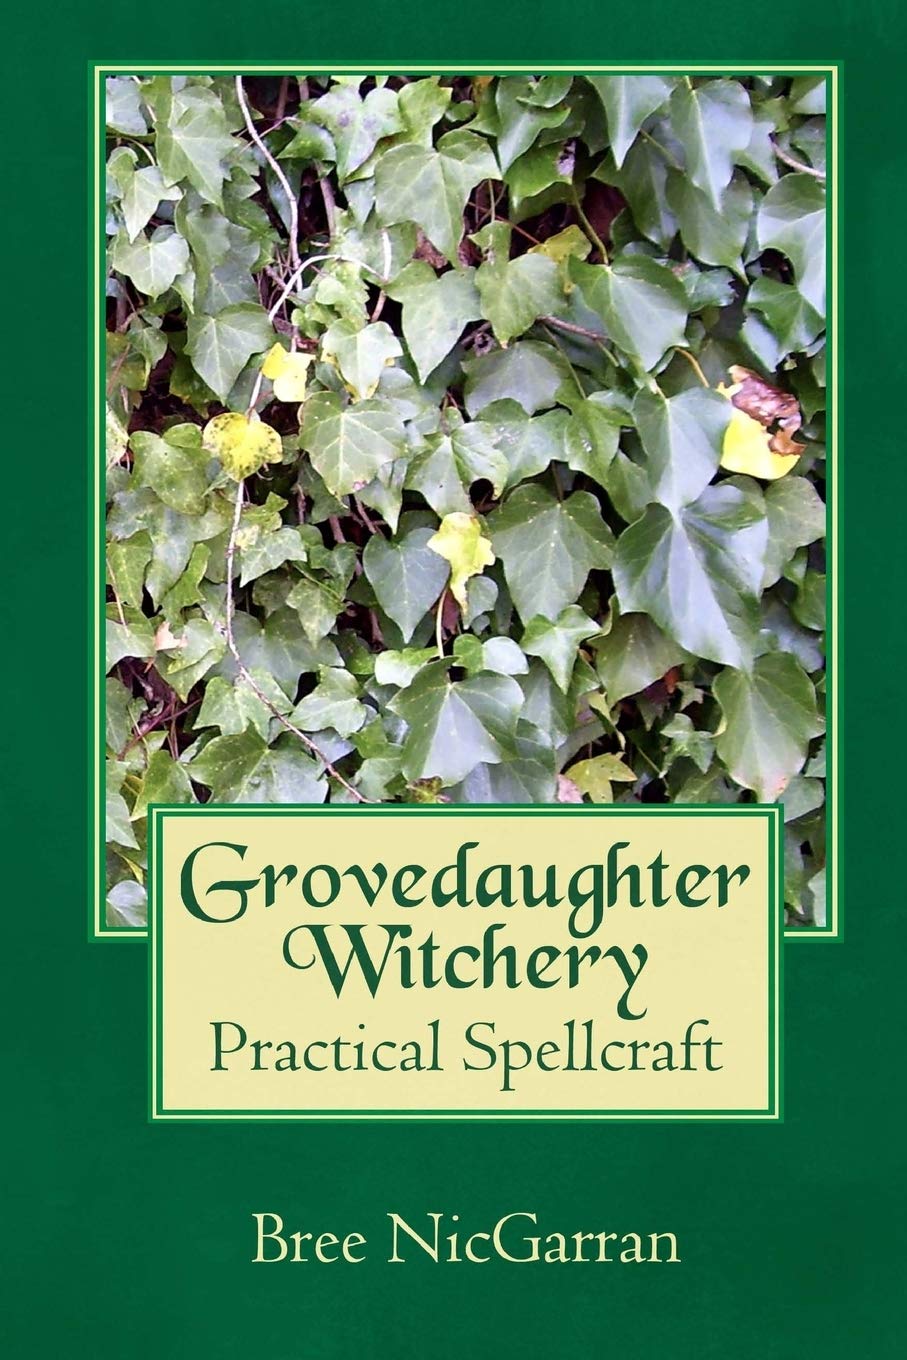 Grovedaughter Witchery: Ptractical Spellcraft